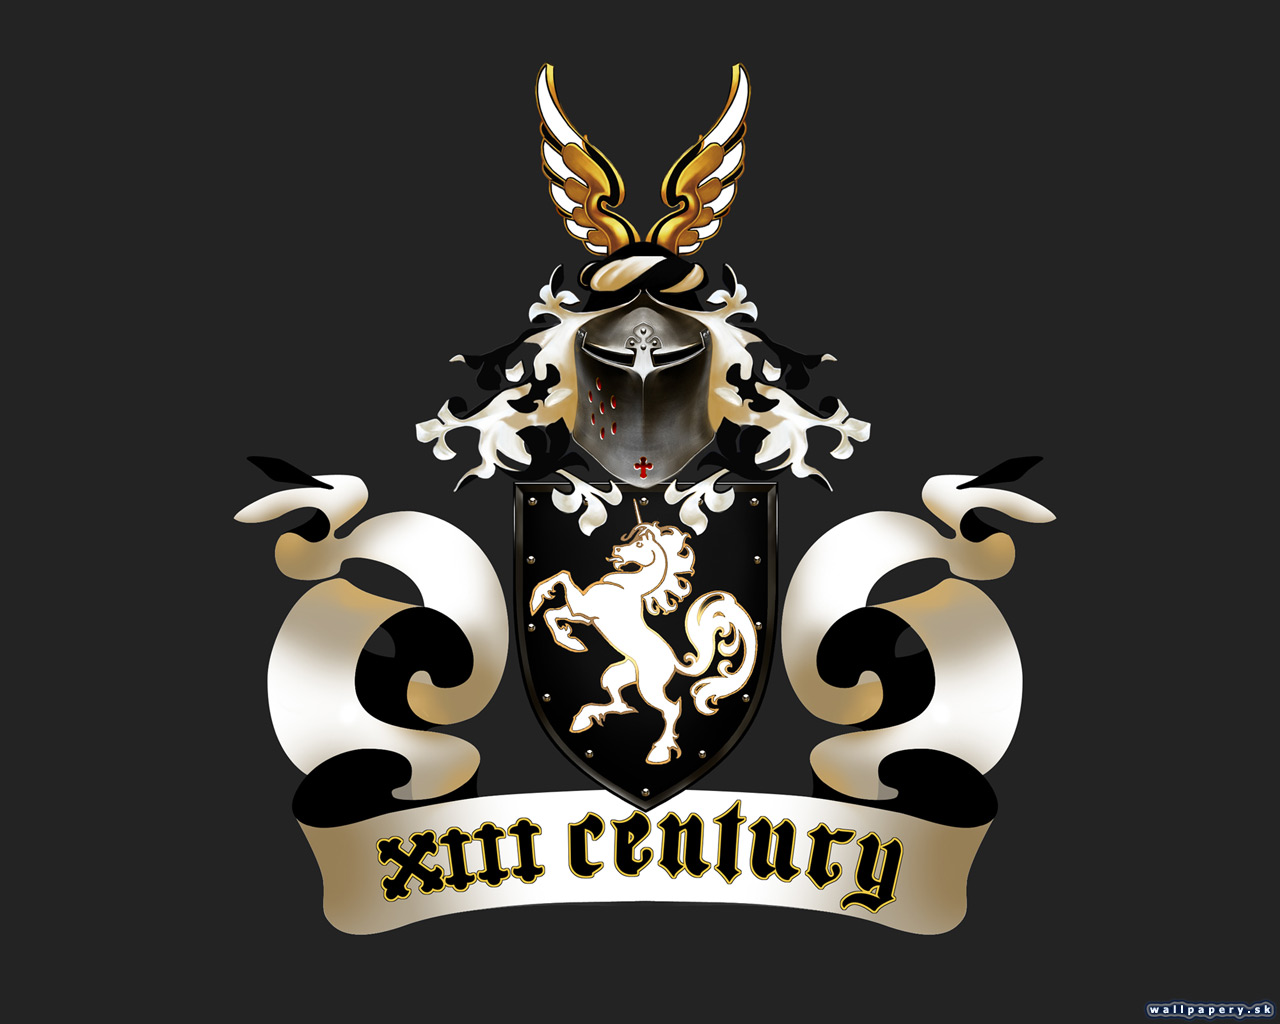 XIII Century: Death or Glory - wallpaper 5